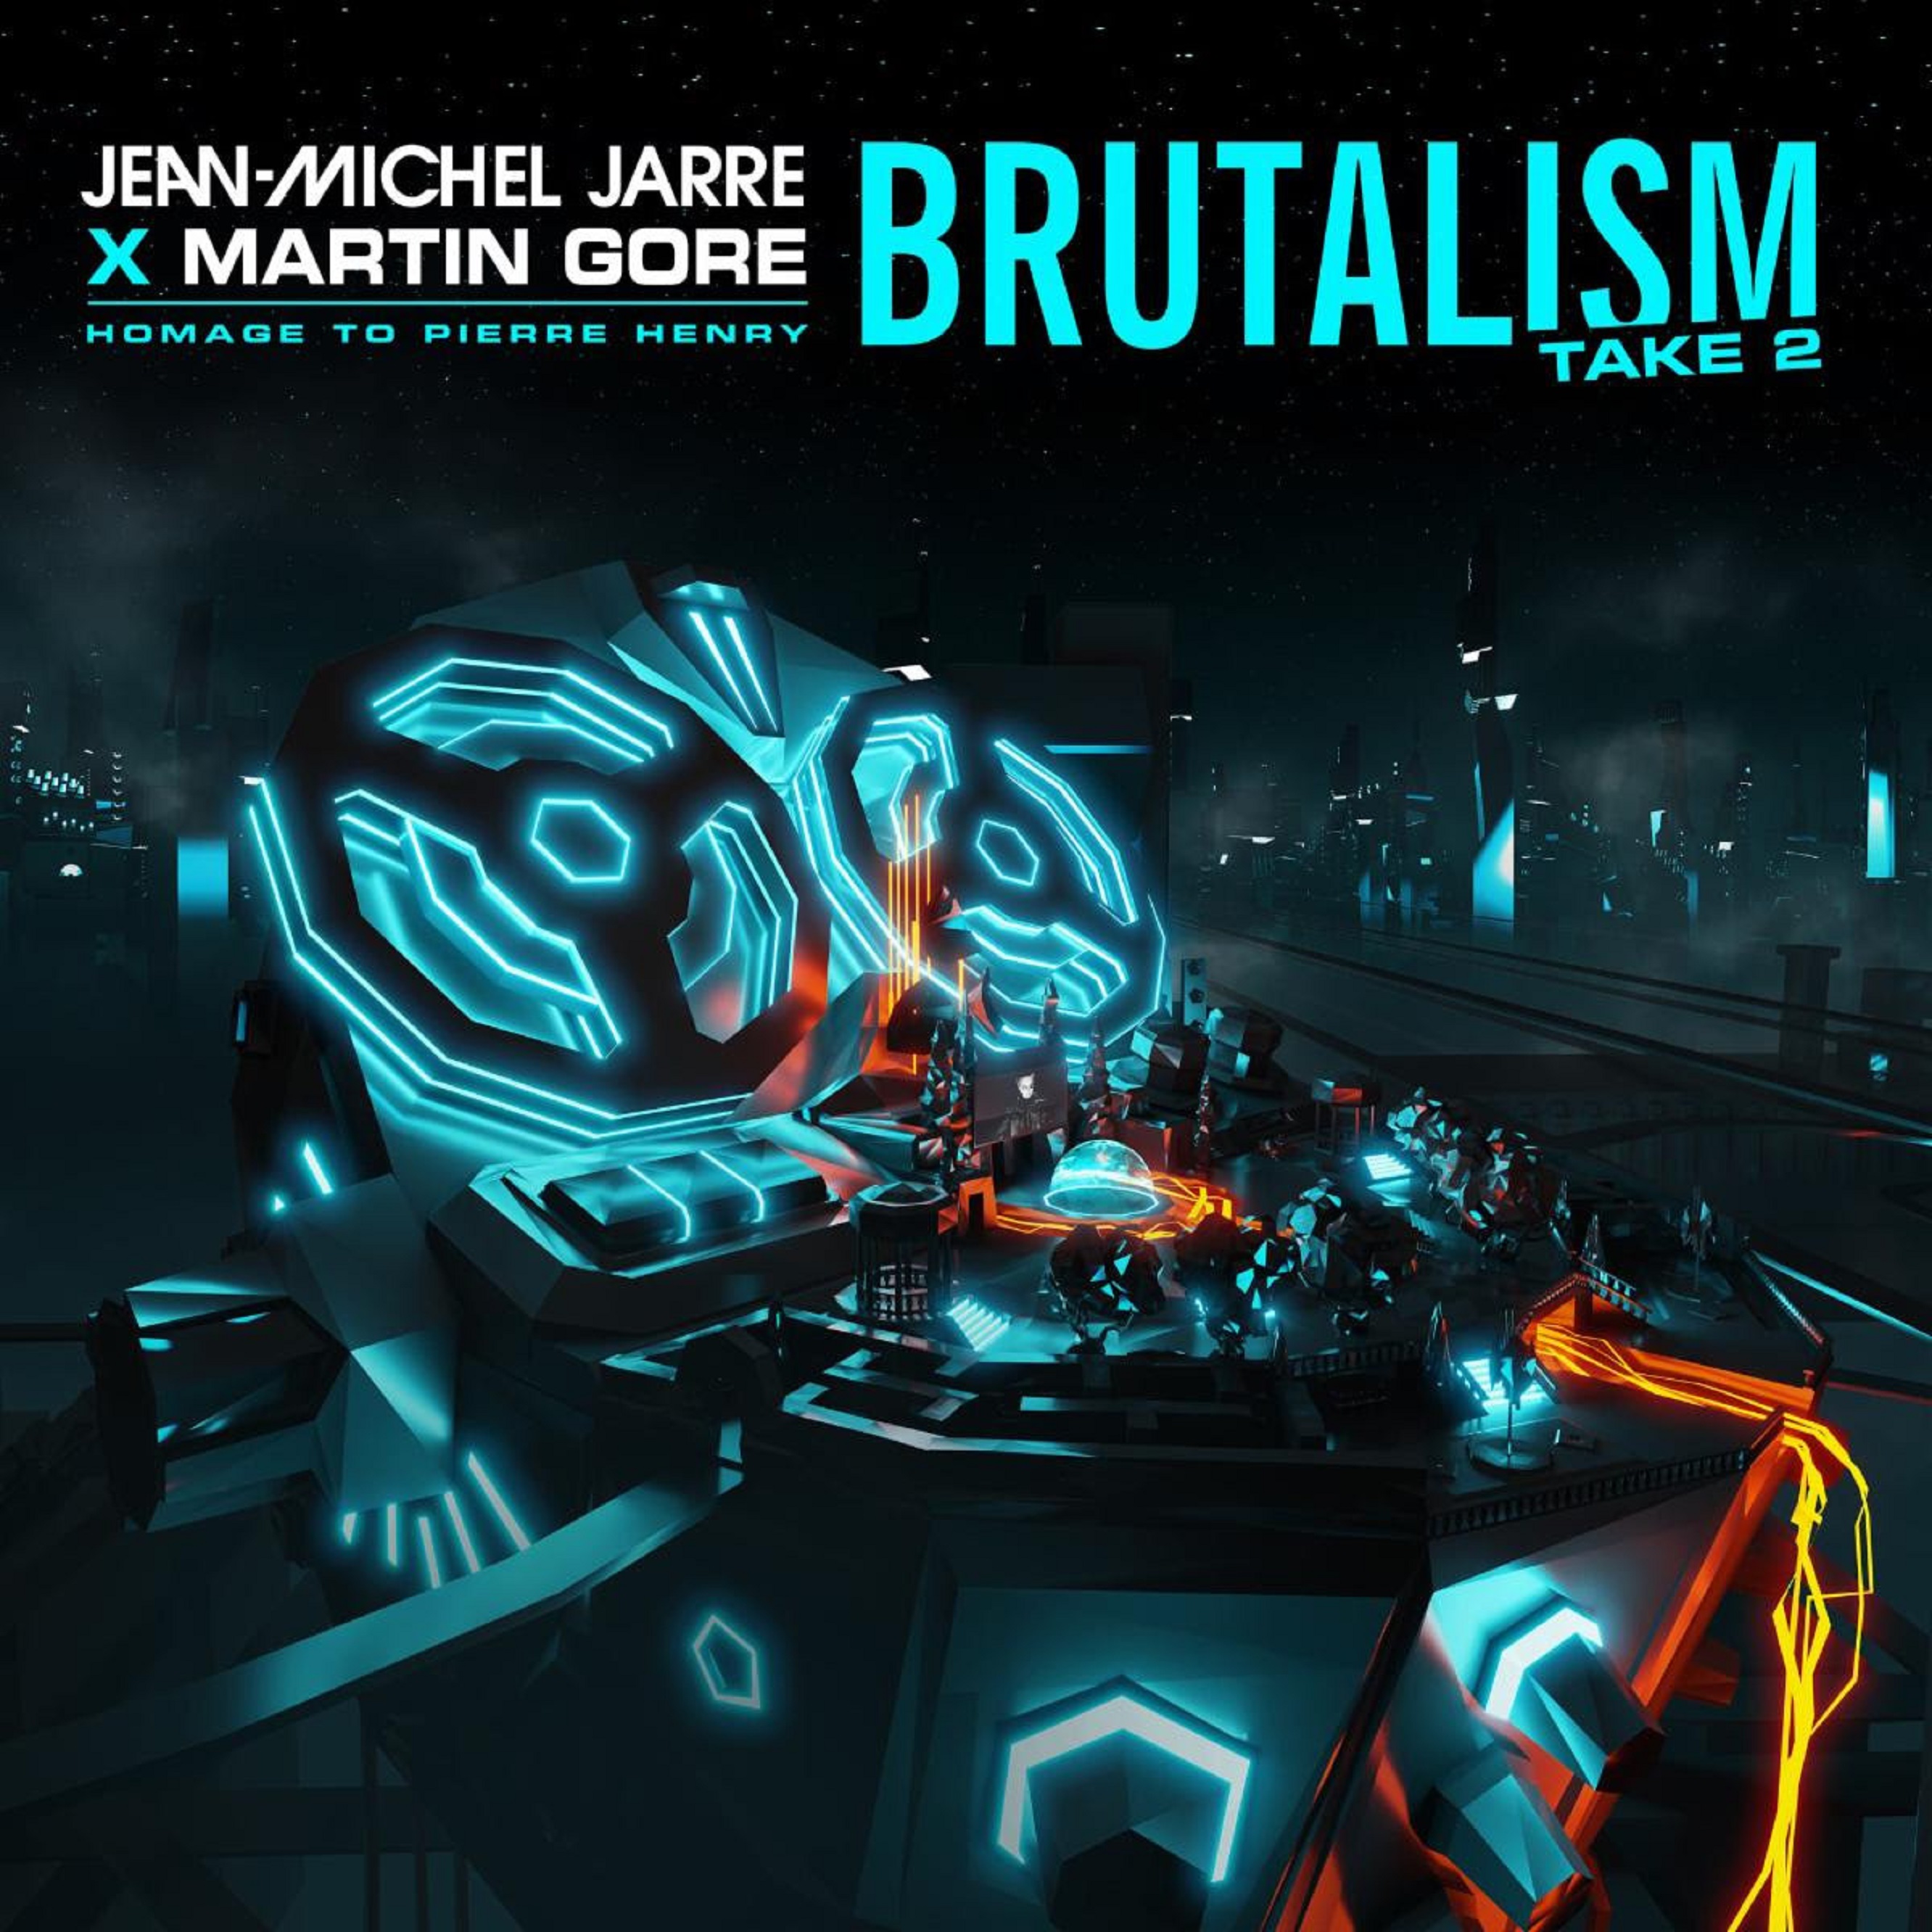 Jean-Michel Jarre x Martin Gore New Single "BRUTALISM TAKE 2" Out Today, September 9